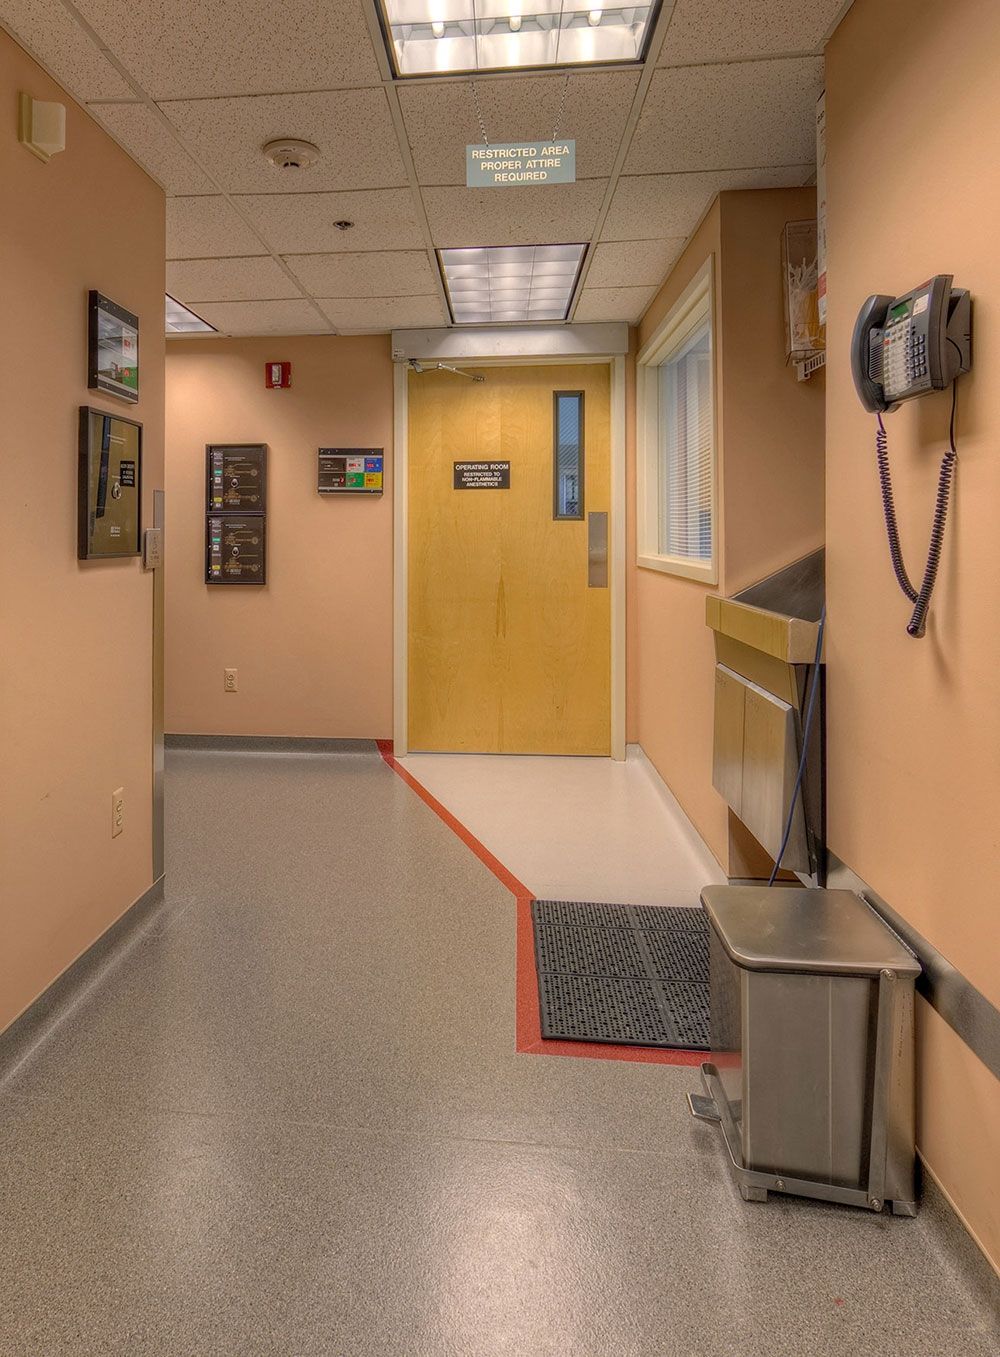 Hallway to the OR